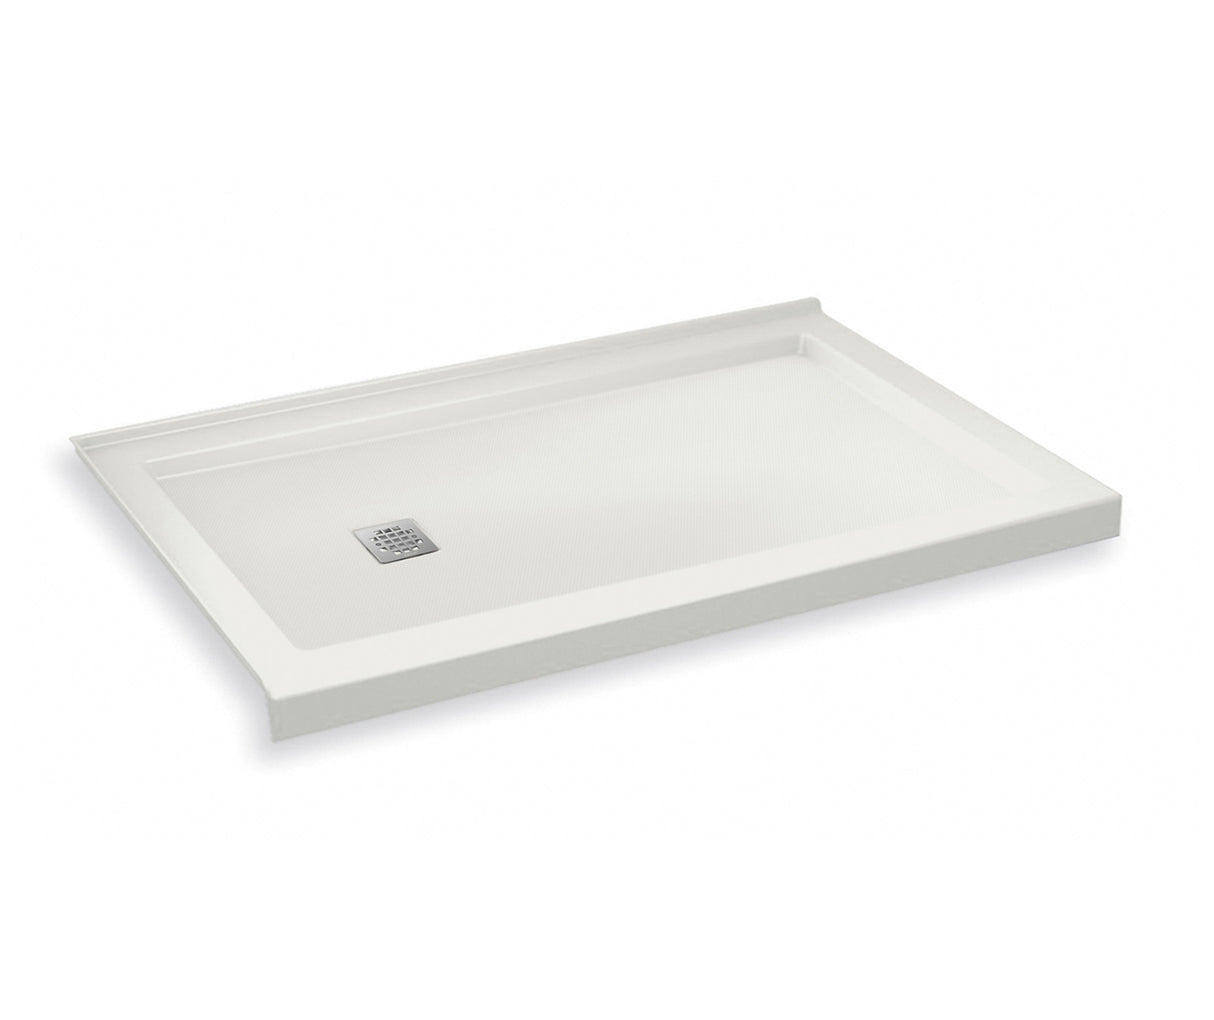 MAAX 420005-542-001-100 B3Square 6032 Acrylic Corner Left Shower Base in White with Anti-slip Bottom with Left-Hand Drain